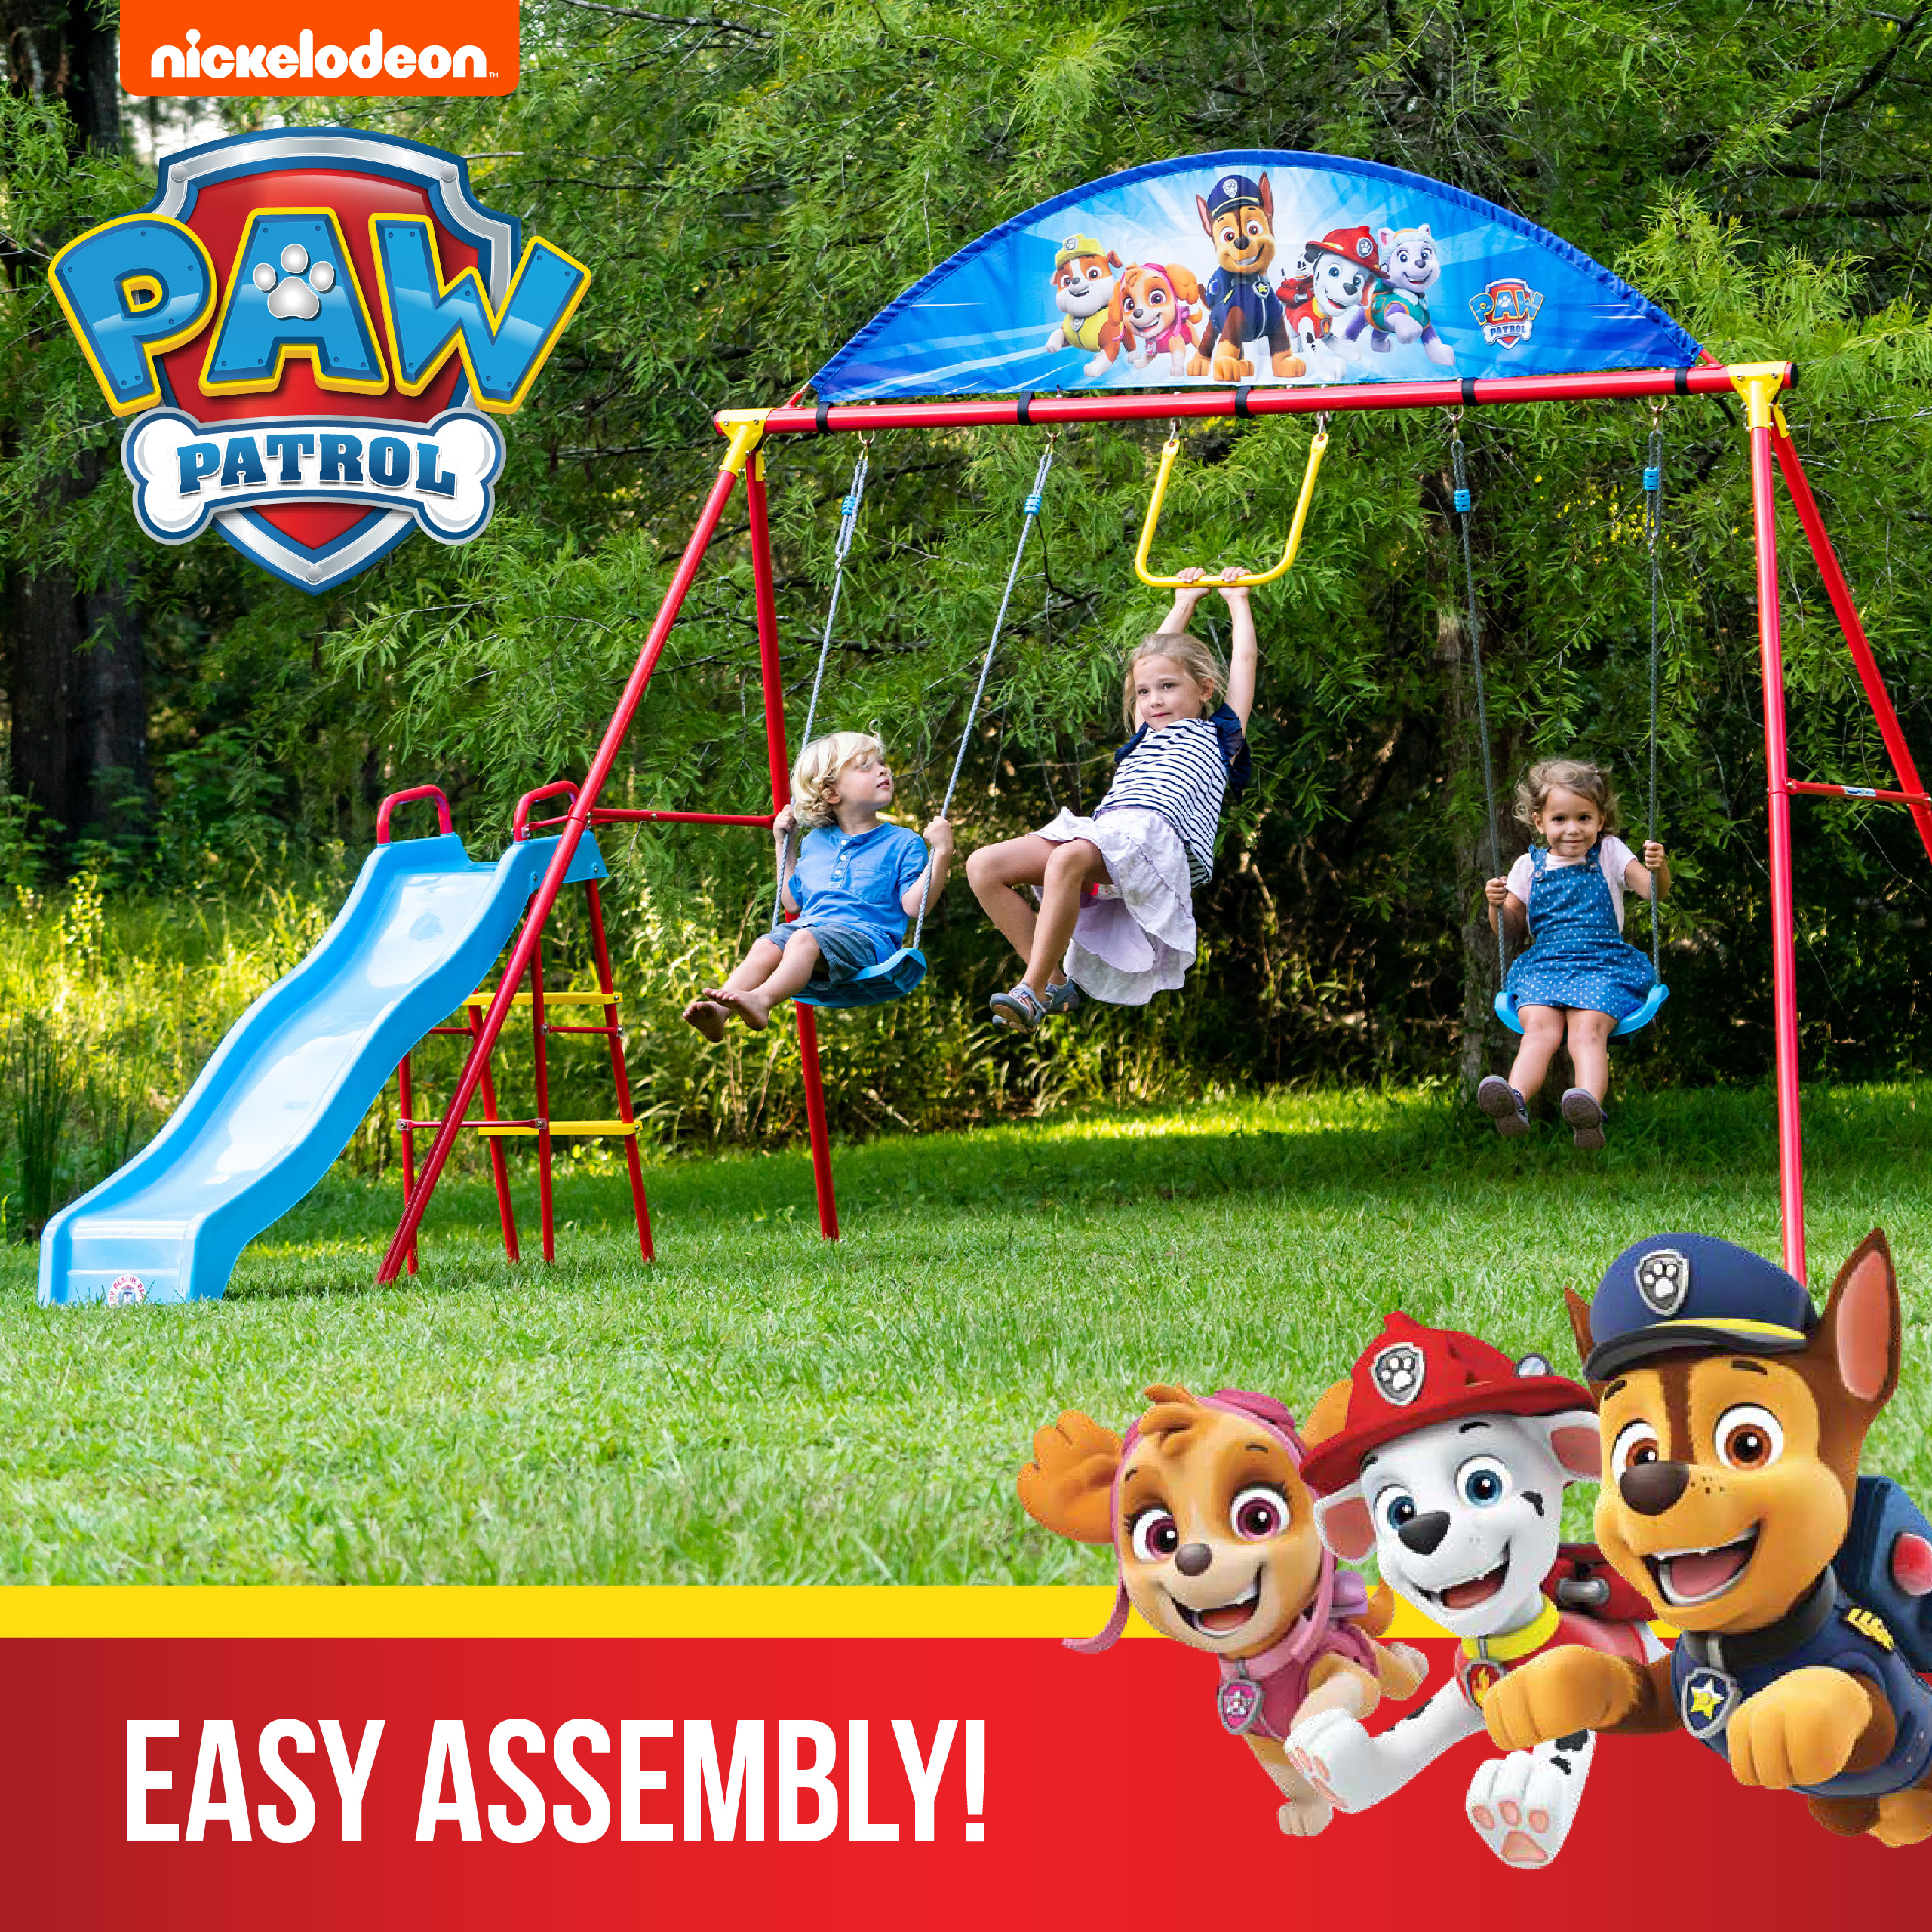 Swurfer Paw Patrol Deluxe Swing Set for Kids, Ages 4 and Up - image 2 of 7